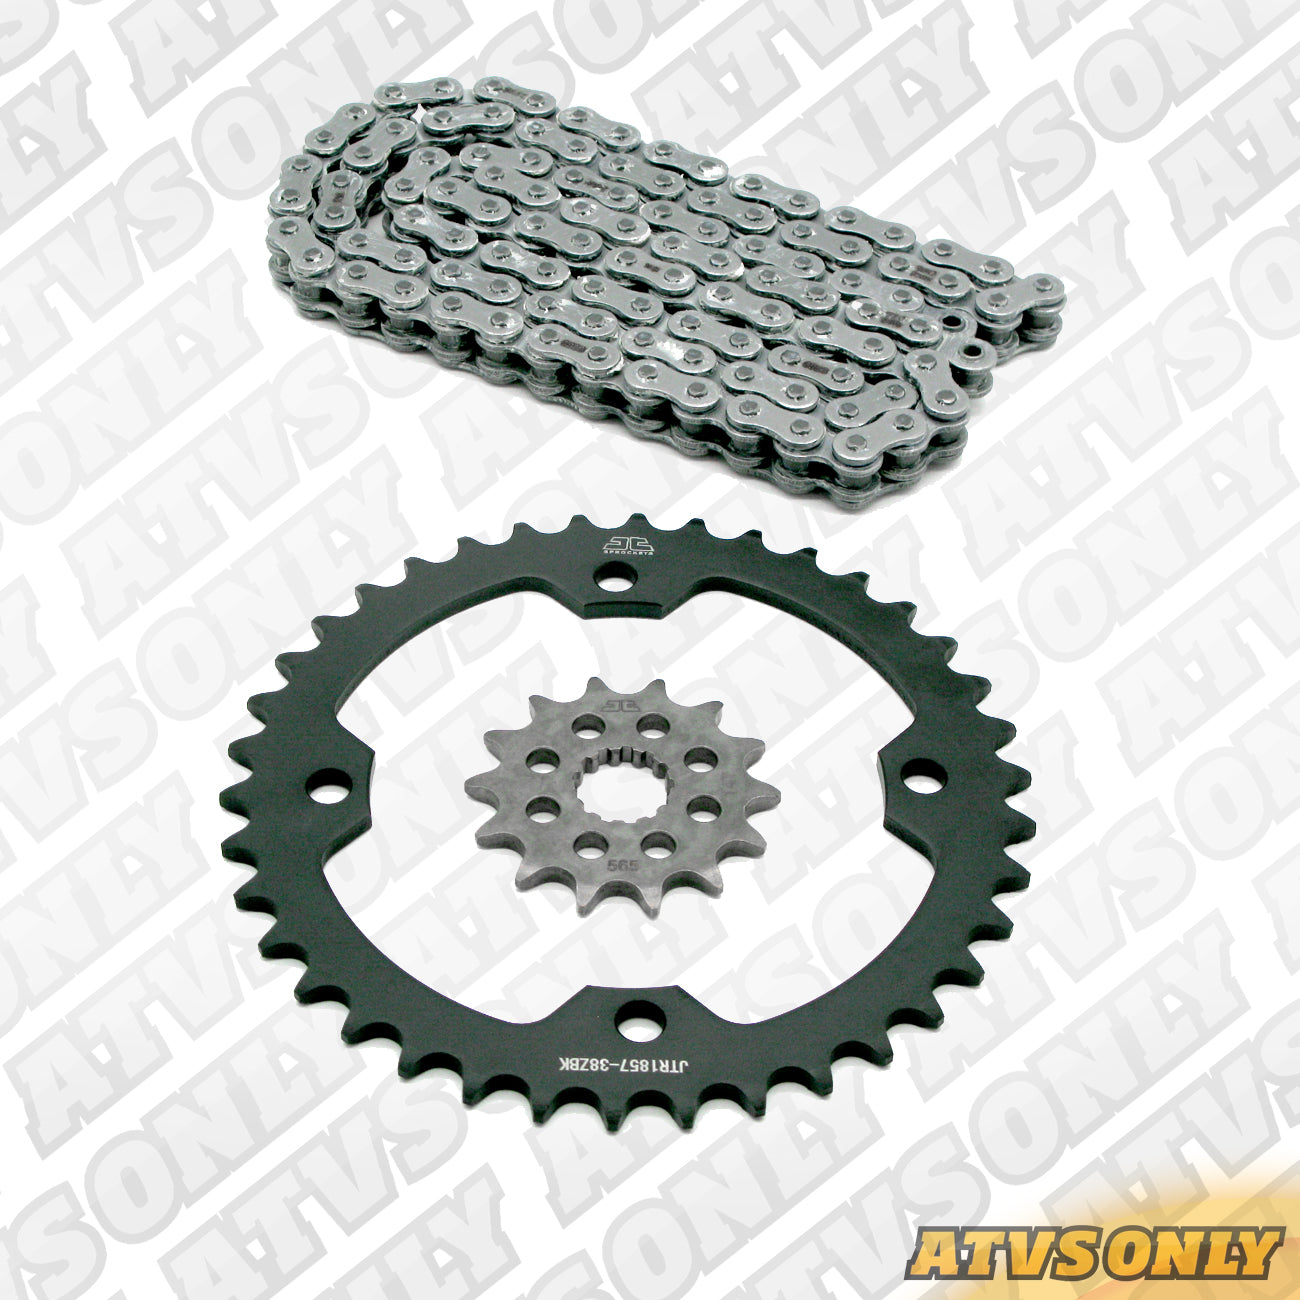 Stock Fitment Chain & Sprocket Kits